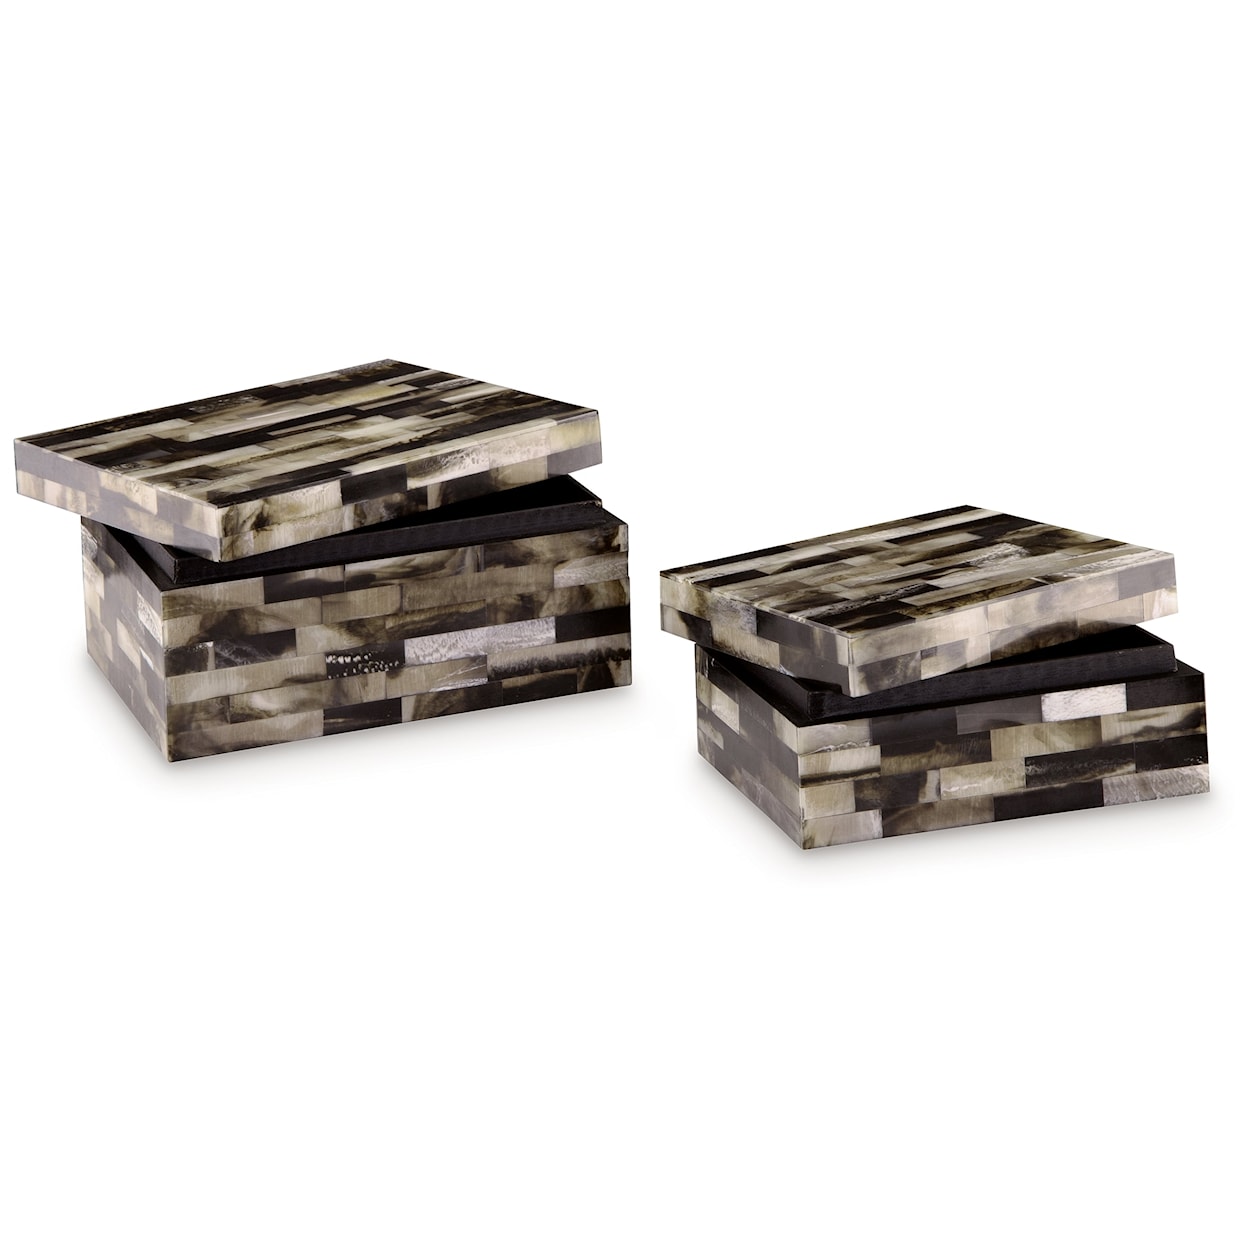 Signature Design by Ashley Ellford Set of 2 Boxes